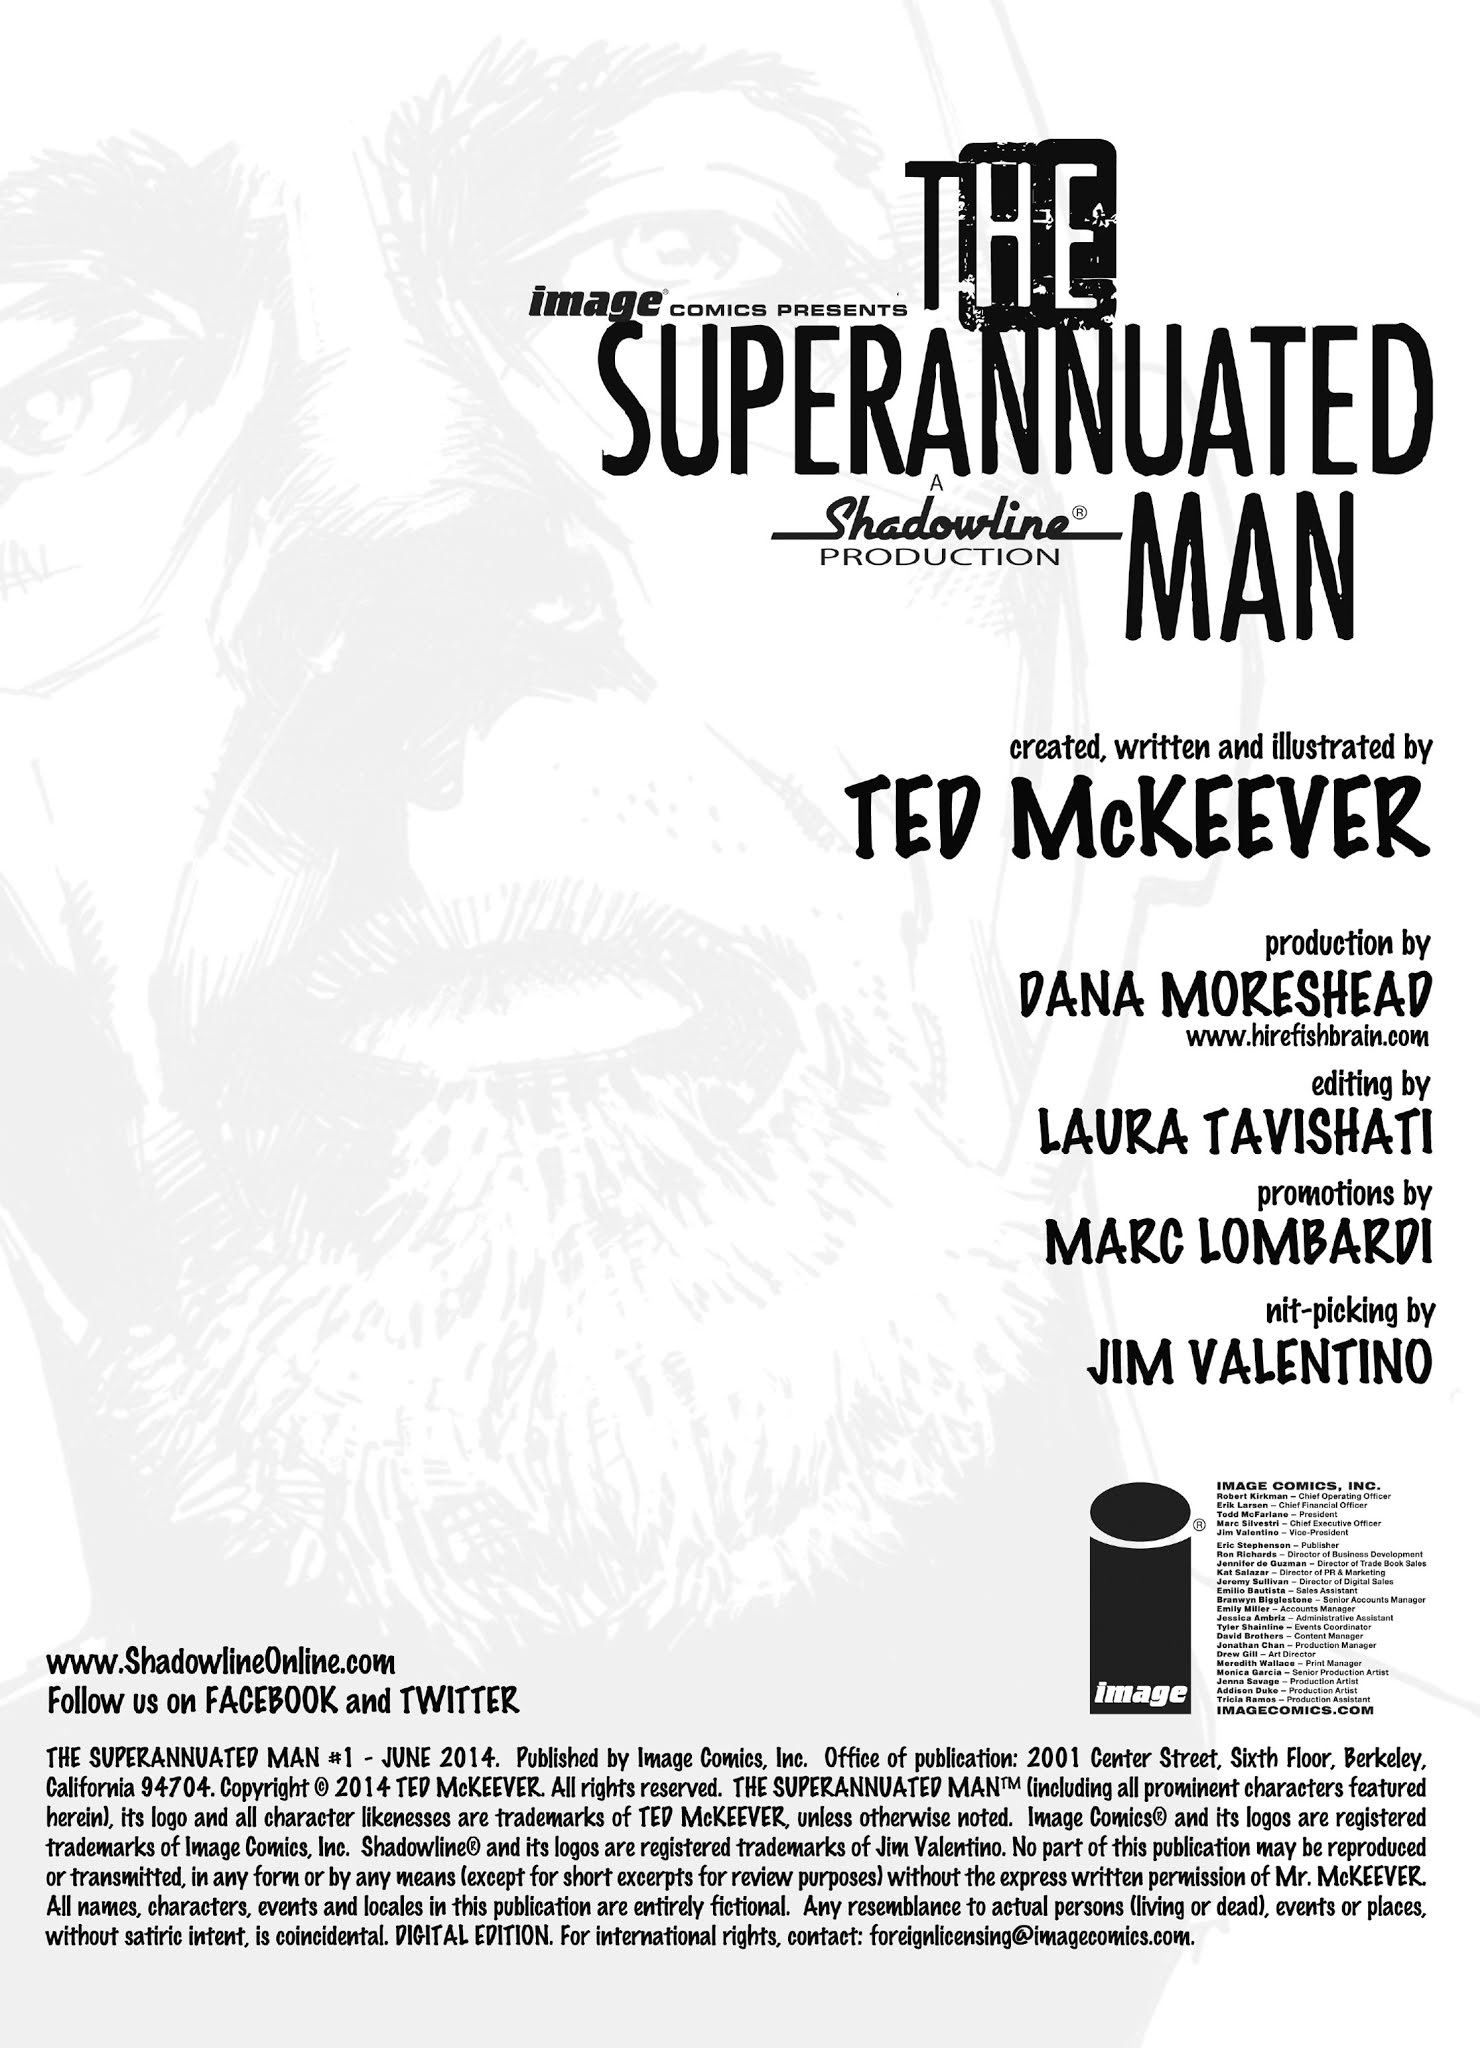 Read online The Superannuated Man comic -  Issue #1 - 2